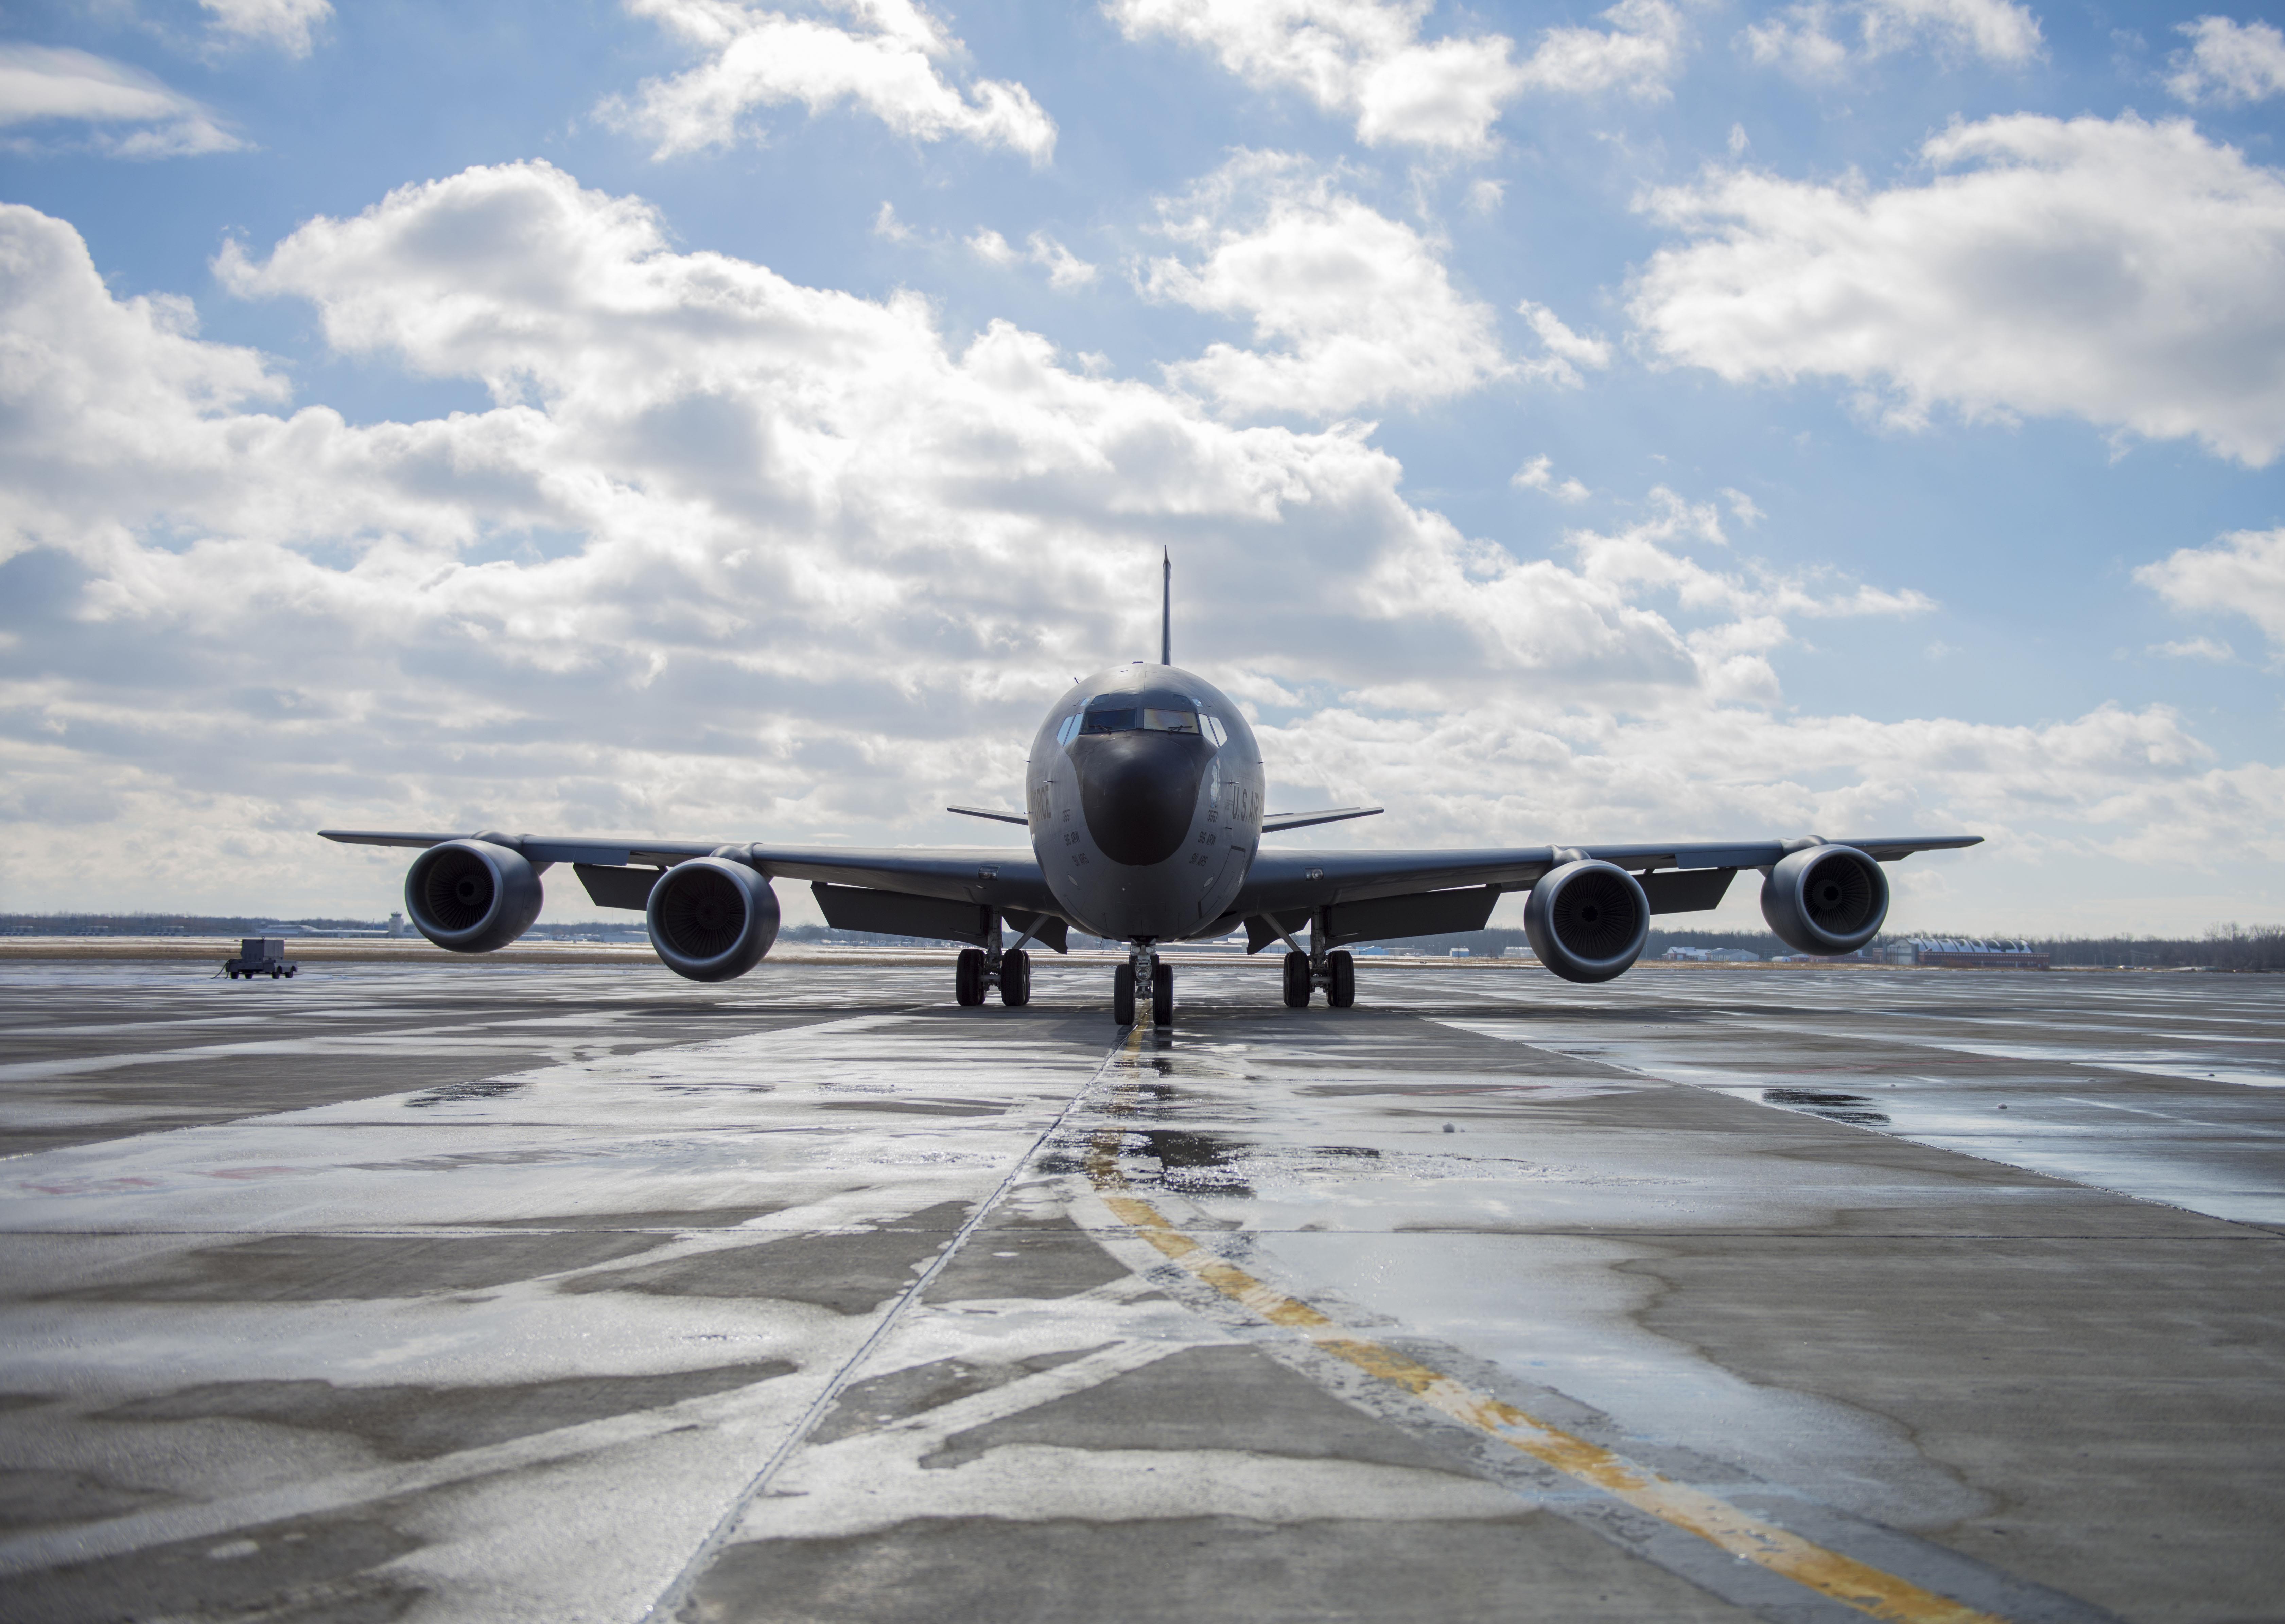 A KC-135 Stratotanker arrives at Niagara Falls Air Reserve Station, marking its official arrival and the beinning of the transition of the 914th's mission from an Airlift Wing to an Air Refueling Wing. This is the first of eight aircraft that will be flown in over the course of the next several months. (U.S. Air Force photo by Tech. Sgt. Stephanie Sawyer)